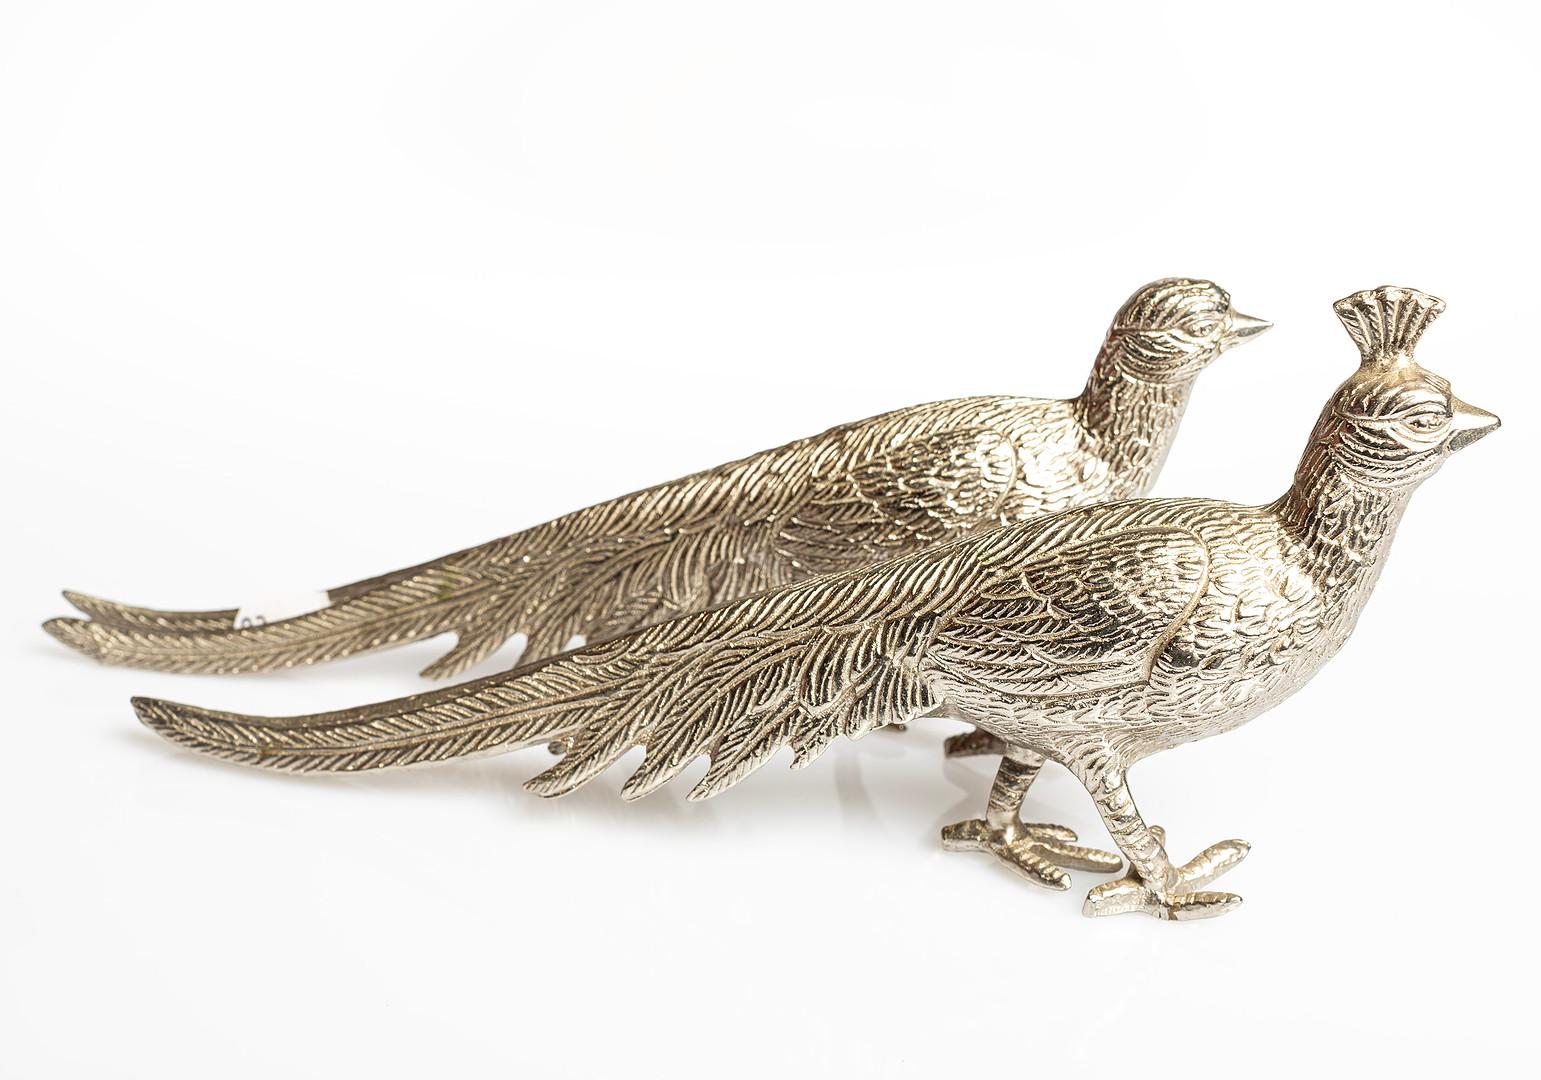 A Pair of Artistically created birds for table decor, silver-plated peacocks - ideal for a coffee table or bookends. These figures are Classic Hollywood Regency! They are each unique from one another, with slightly different positions and physical